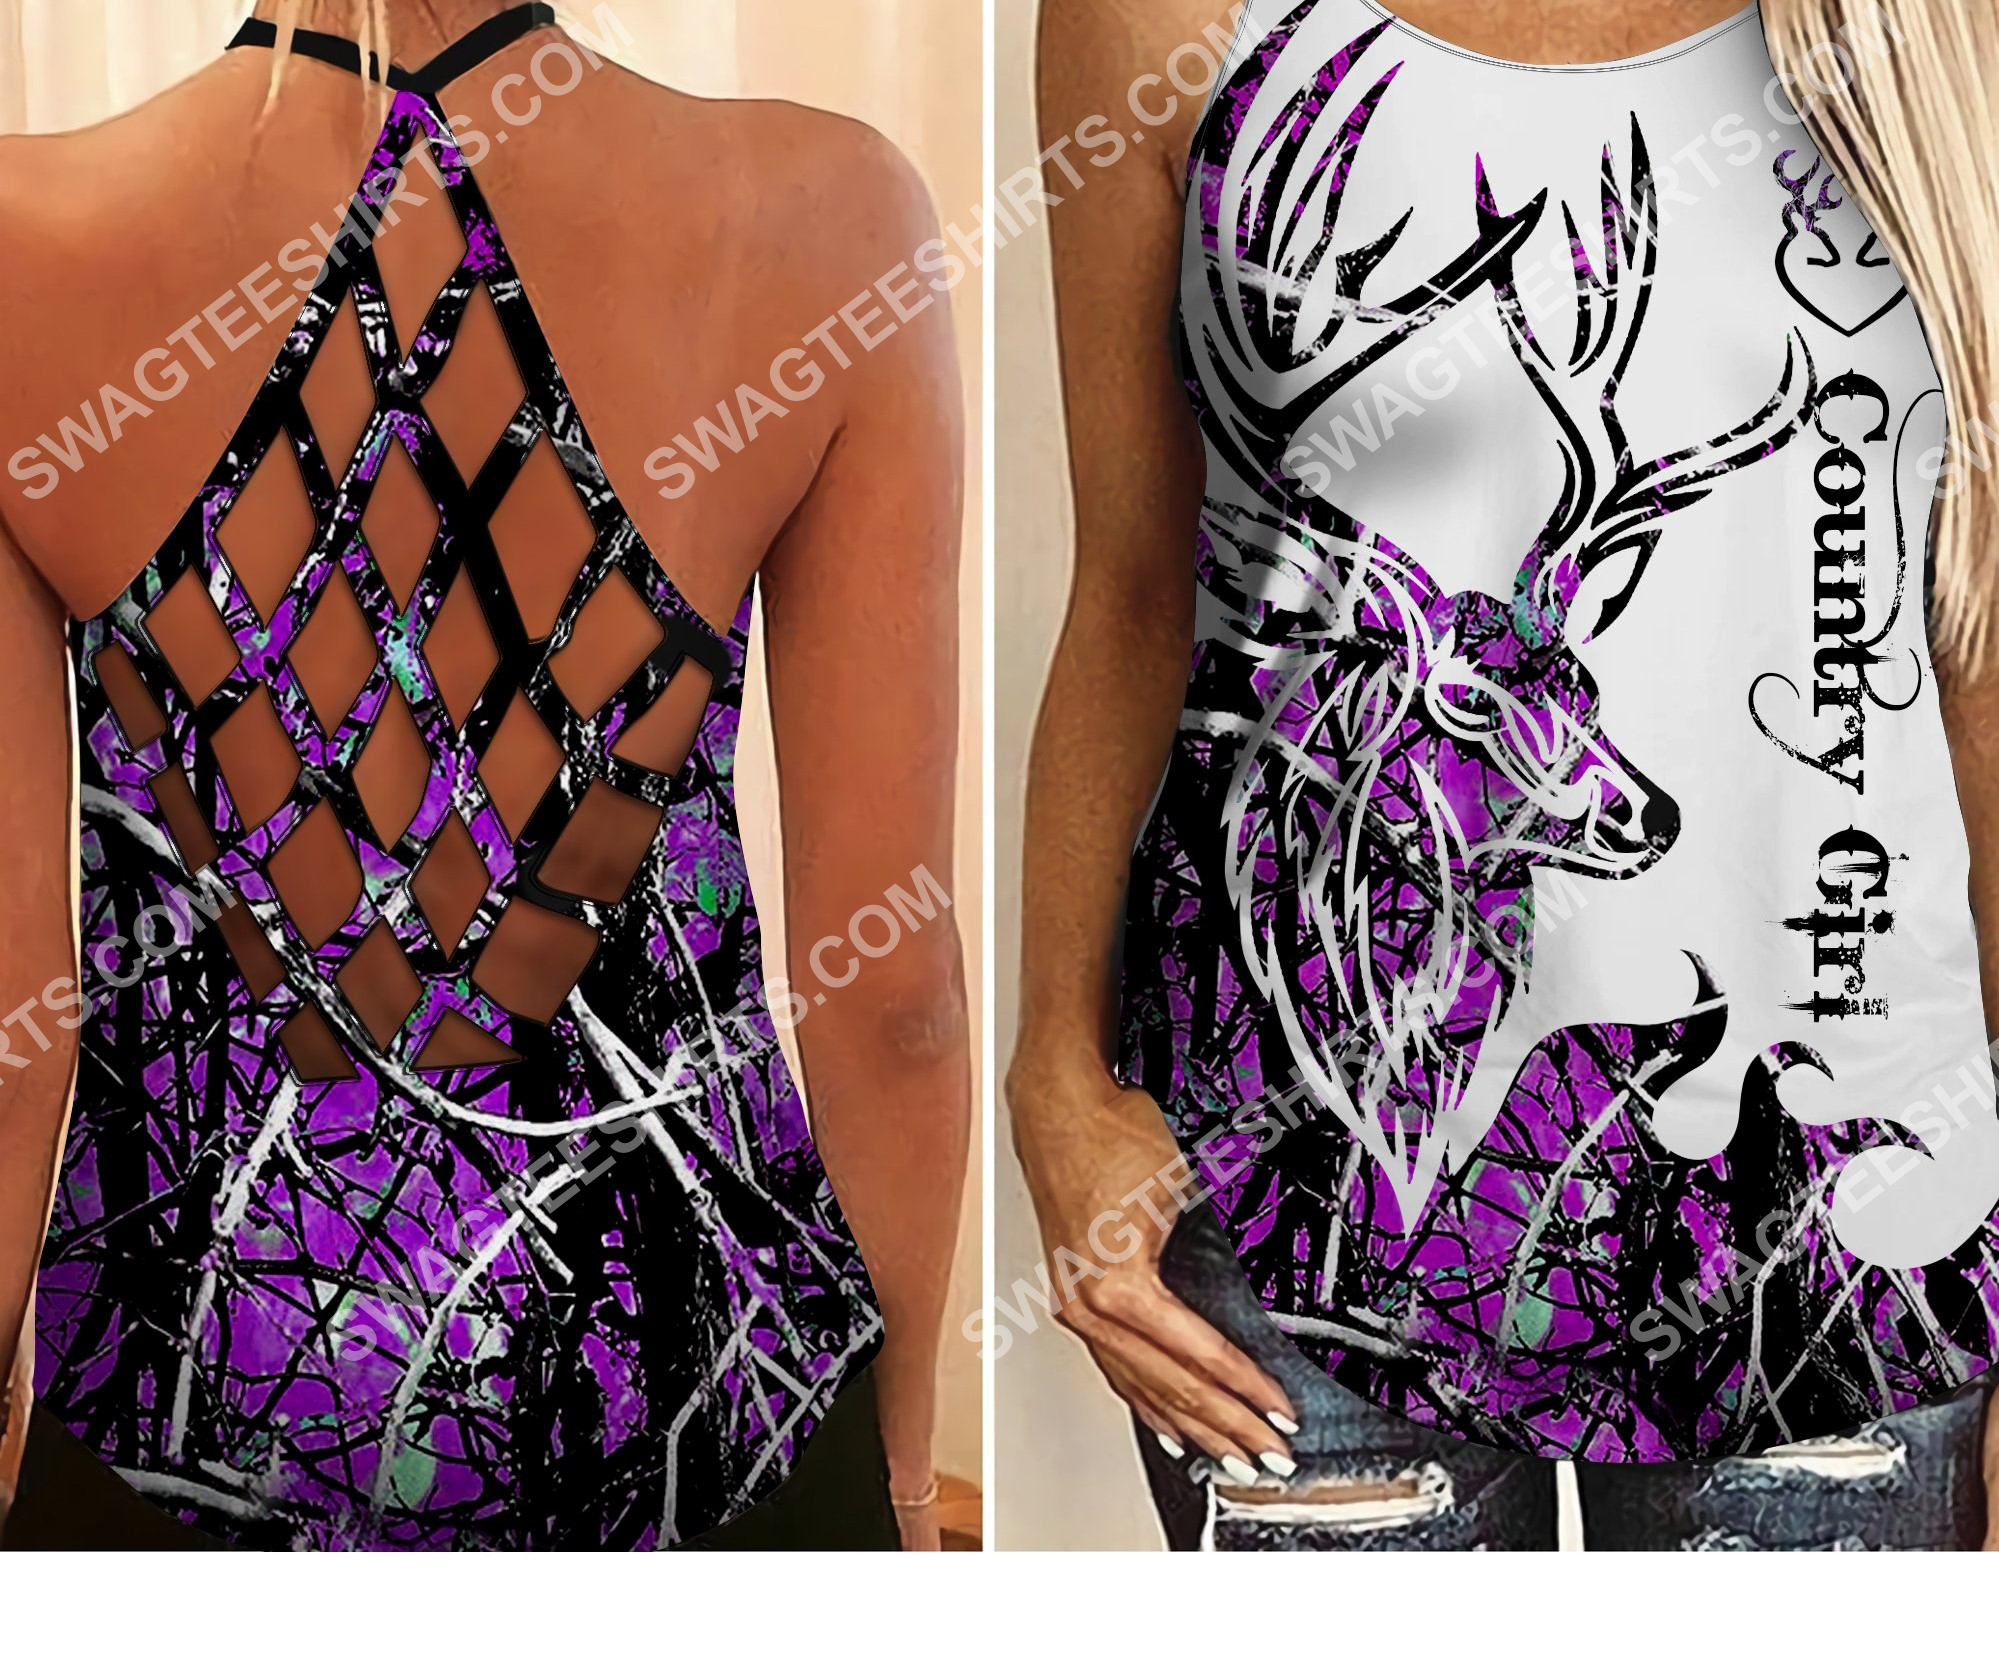 for hunting country girl all over printed criss-cross tank top 2 - Copy (2)